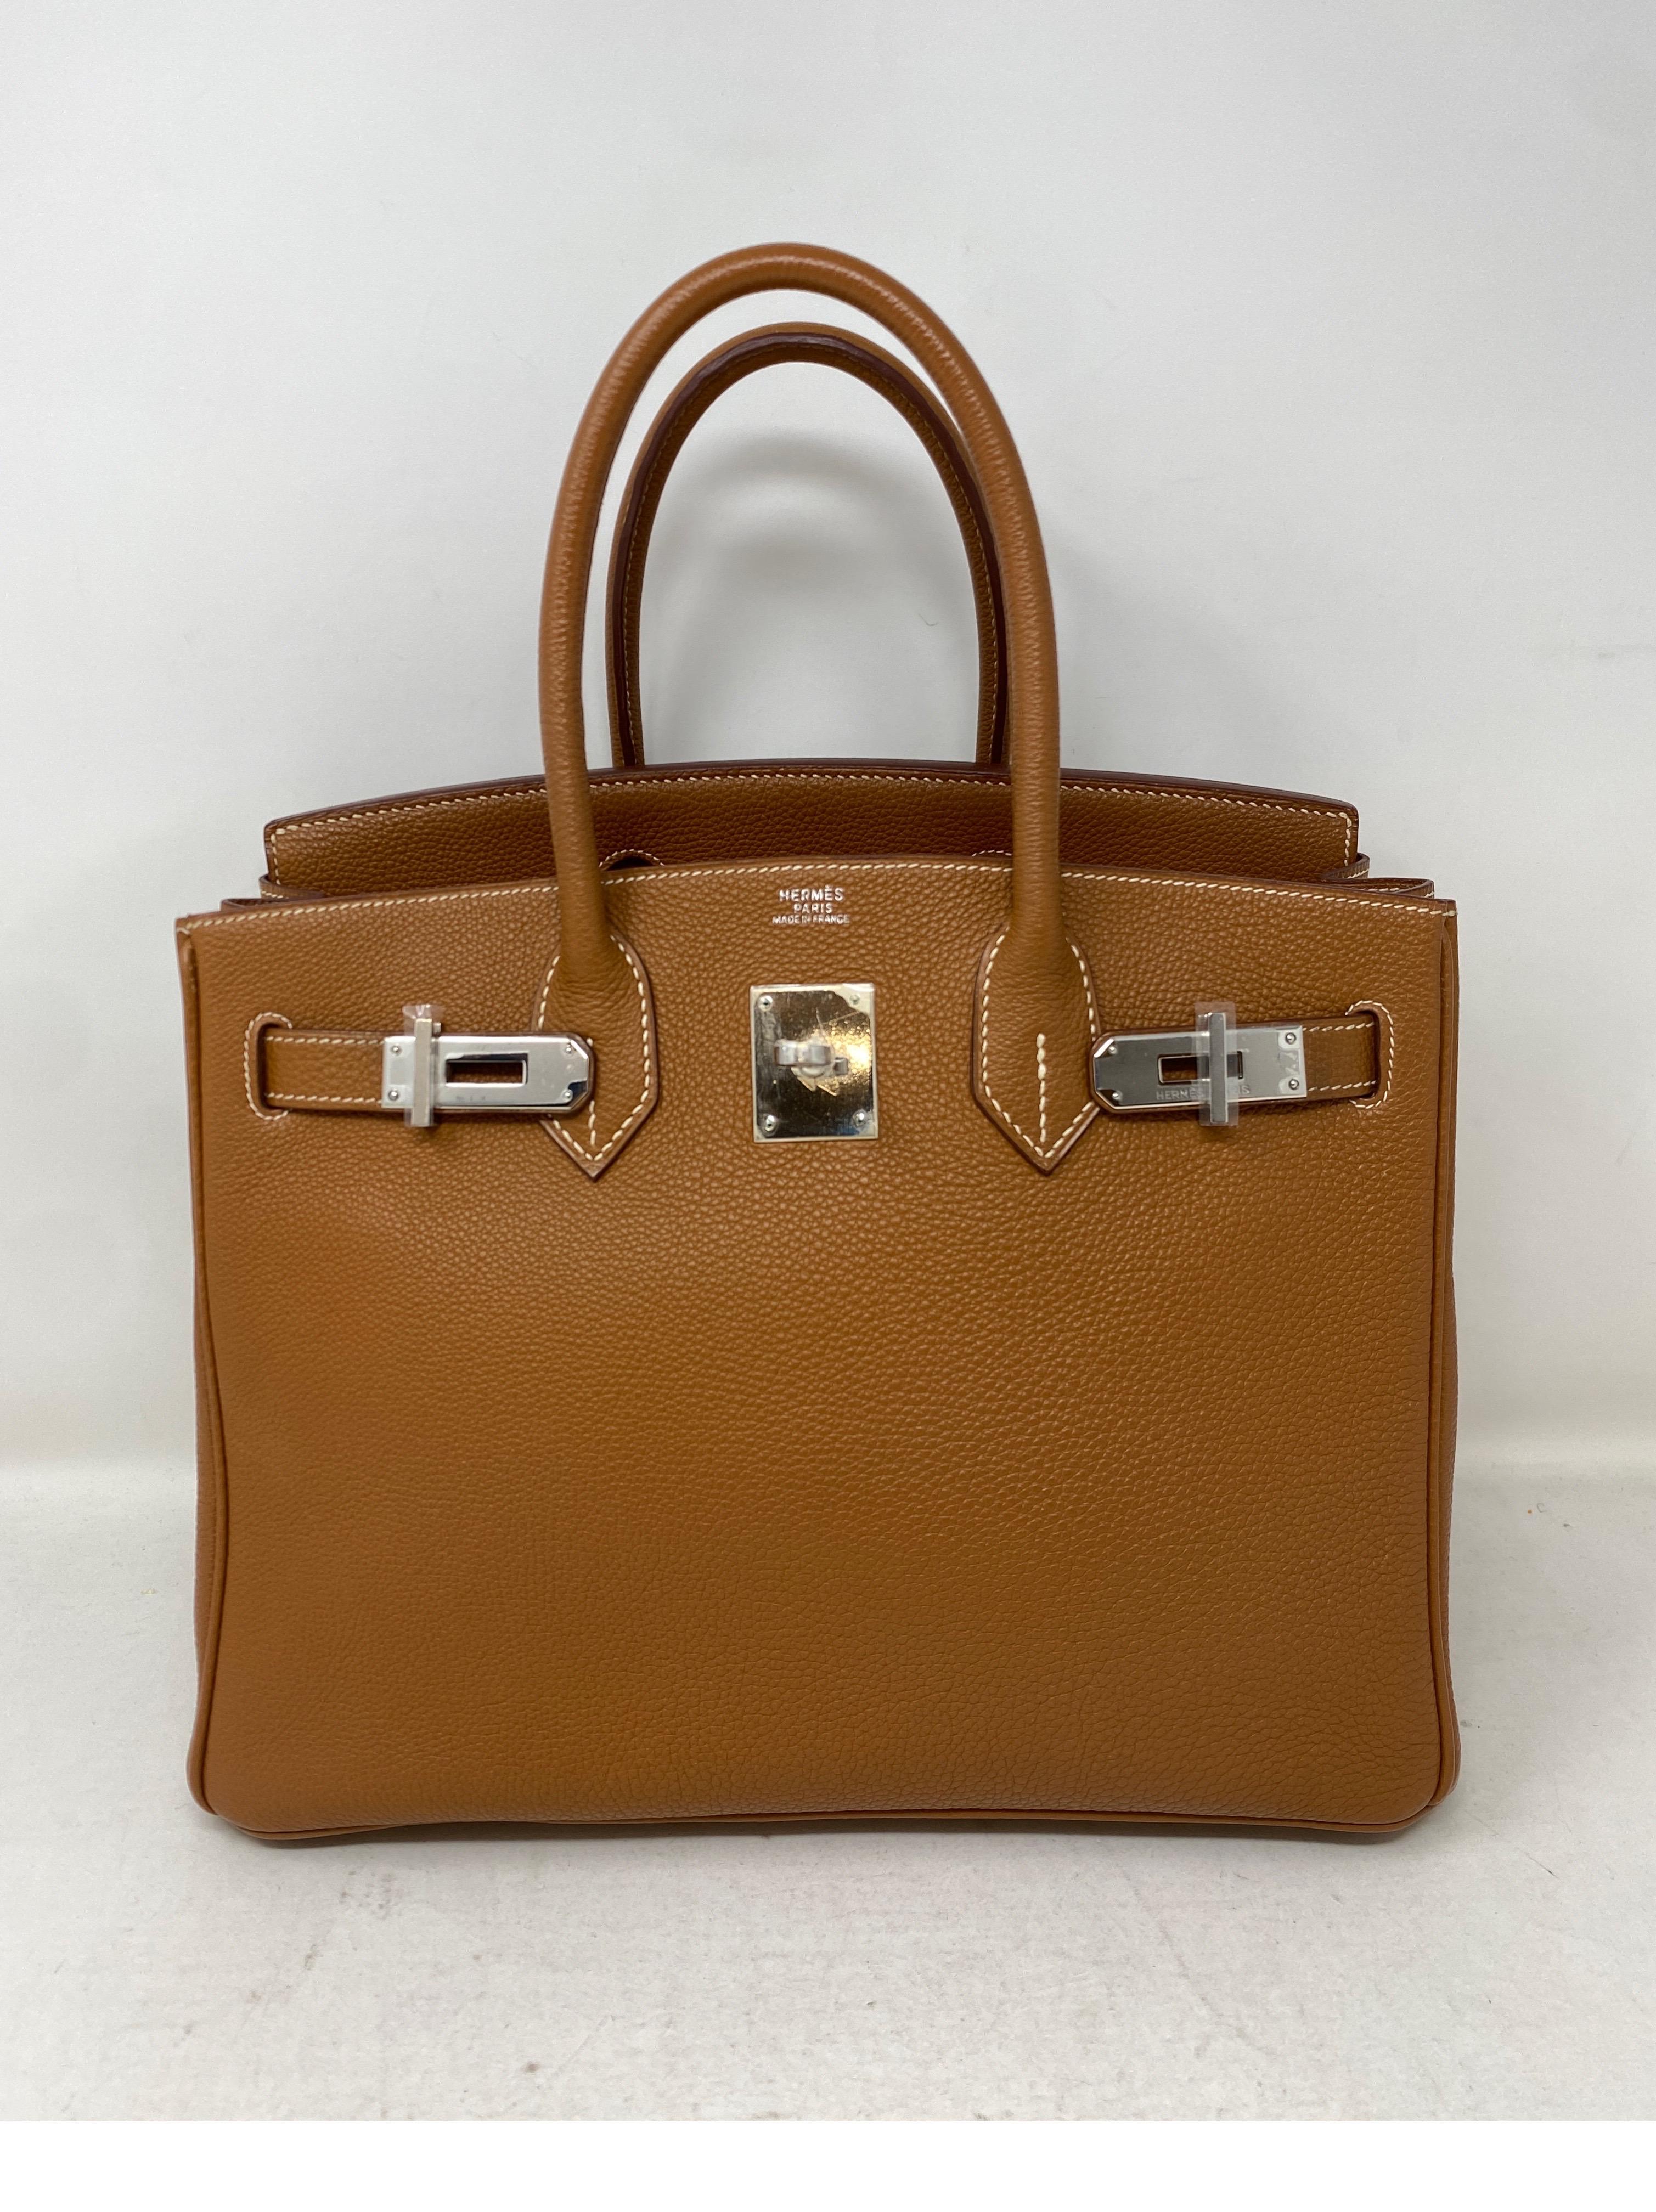 Hermes Gold 30 Birkin with Palladium Silver Hardware Bag. Looks like new. Excellent condition. Plastic is still on the hardware. Gorgeous gold tan color. The classic Hermes color. Size 30 is the most in demand. Great neutral color. Includes